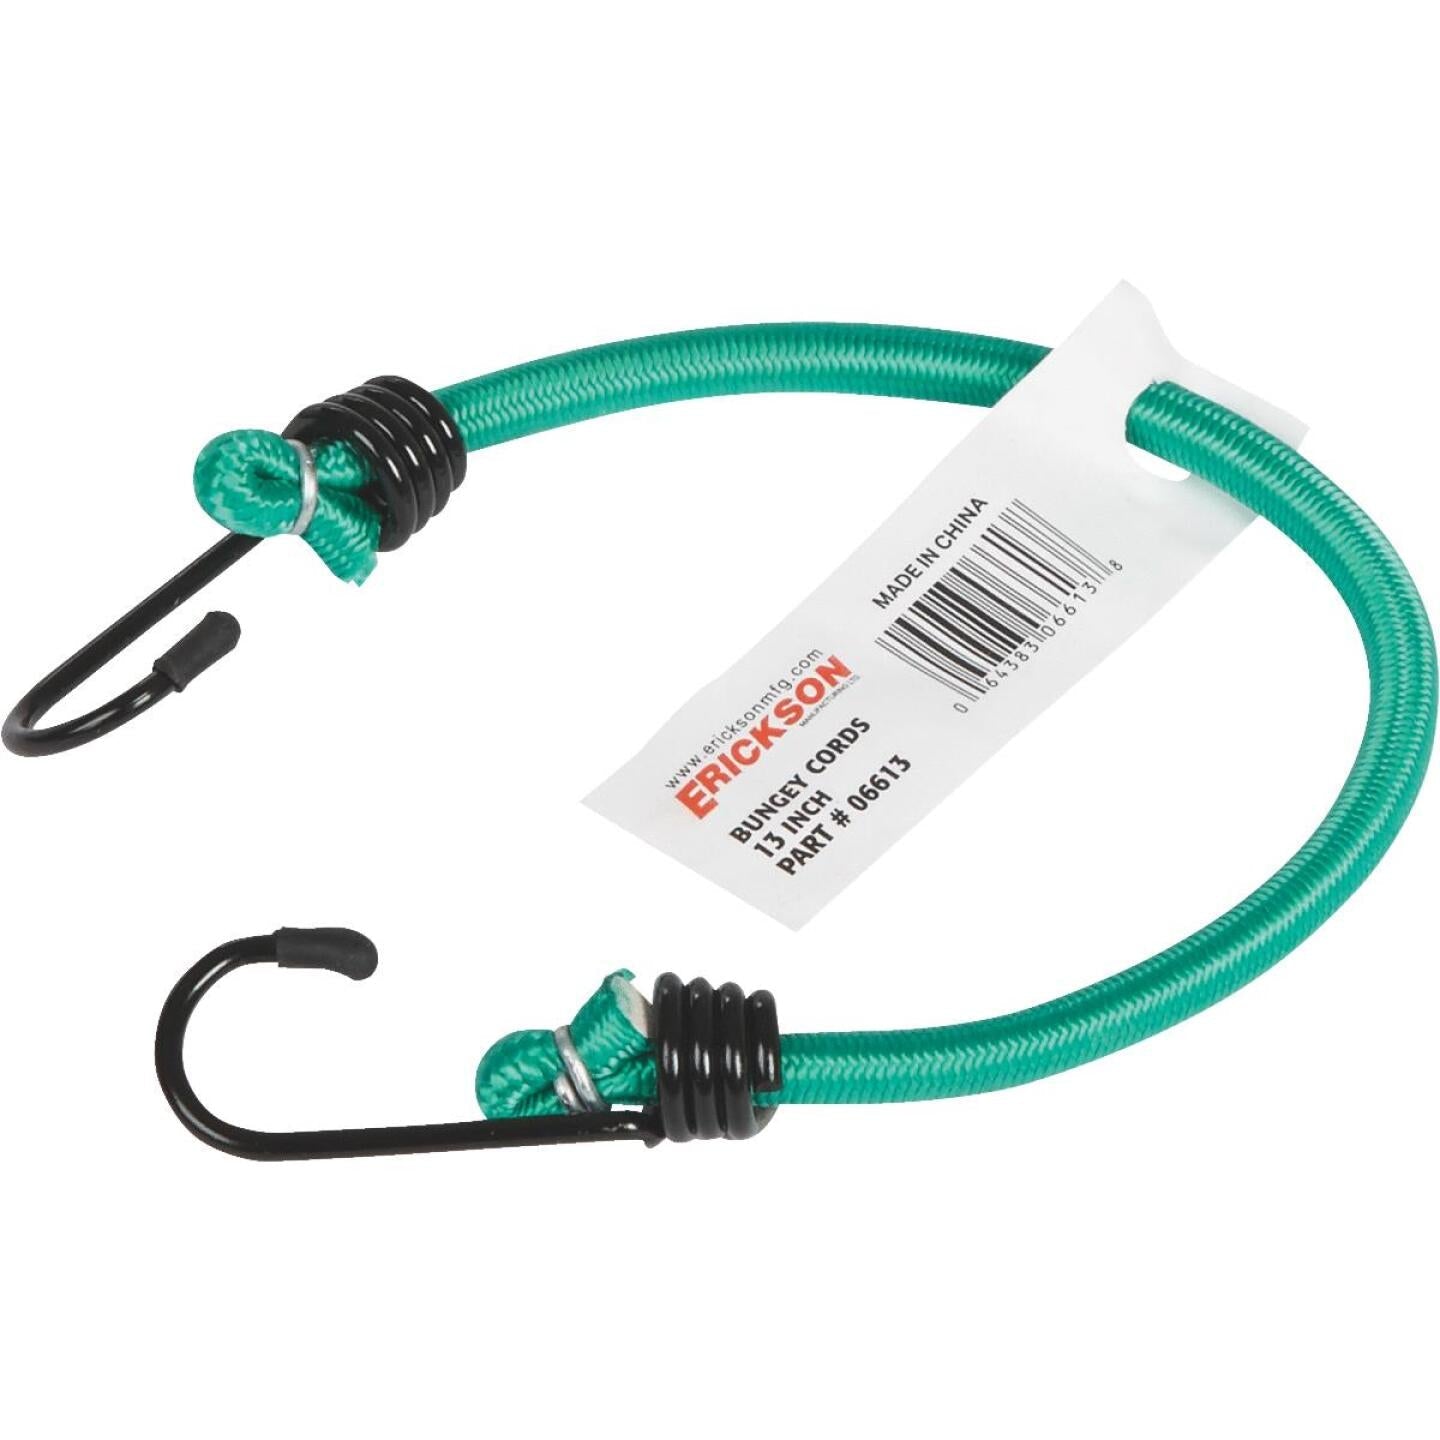 Erickson, Erickson 1/4 In. x 13 In. Bungee Cord, Assorted Colors